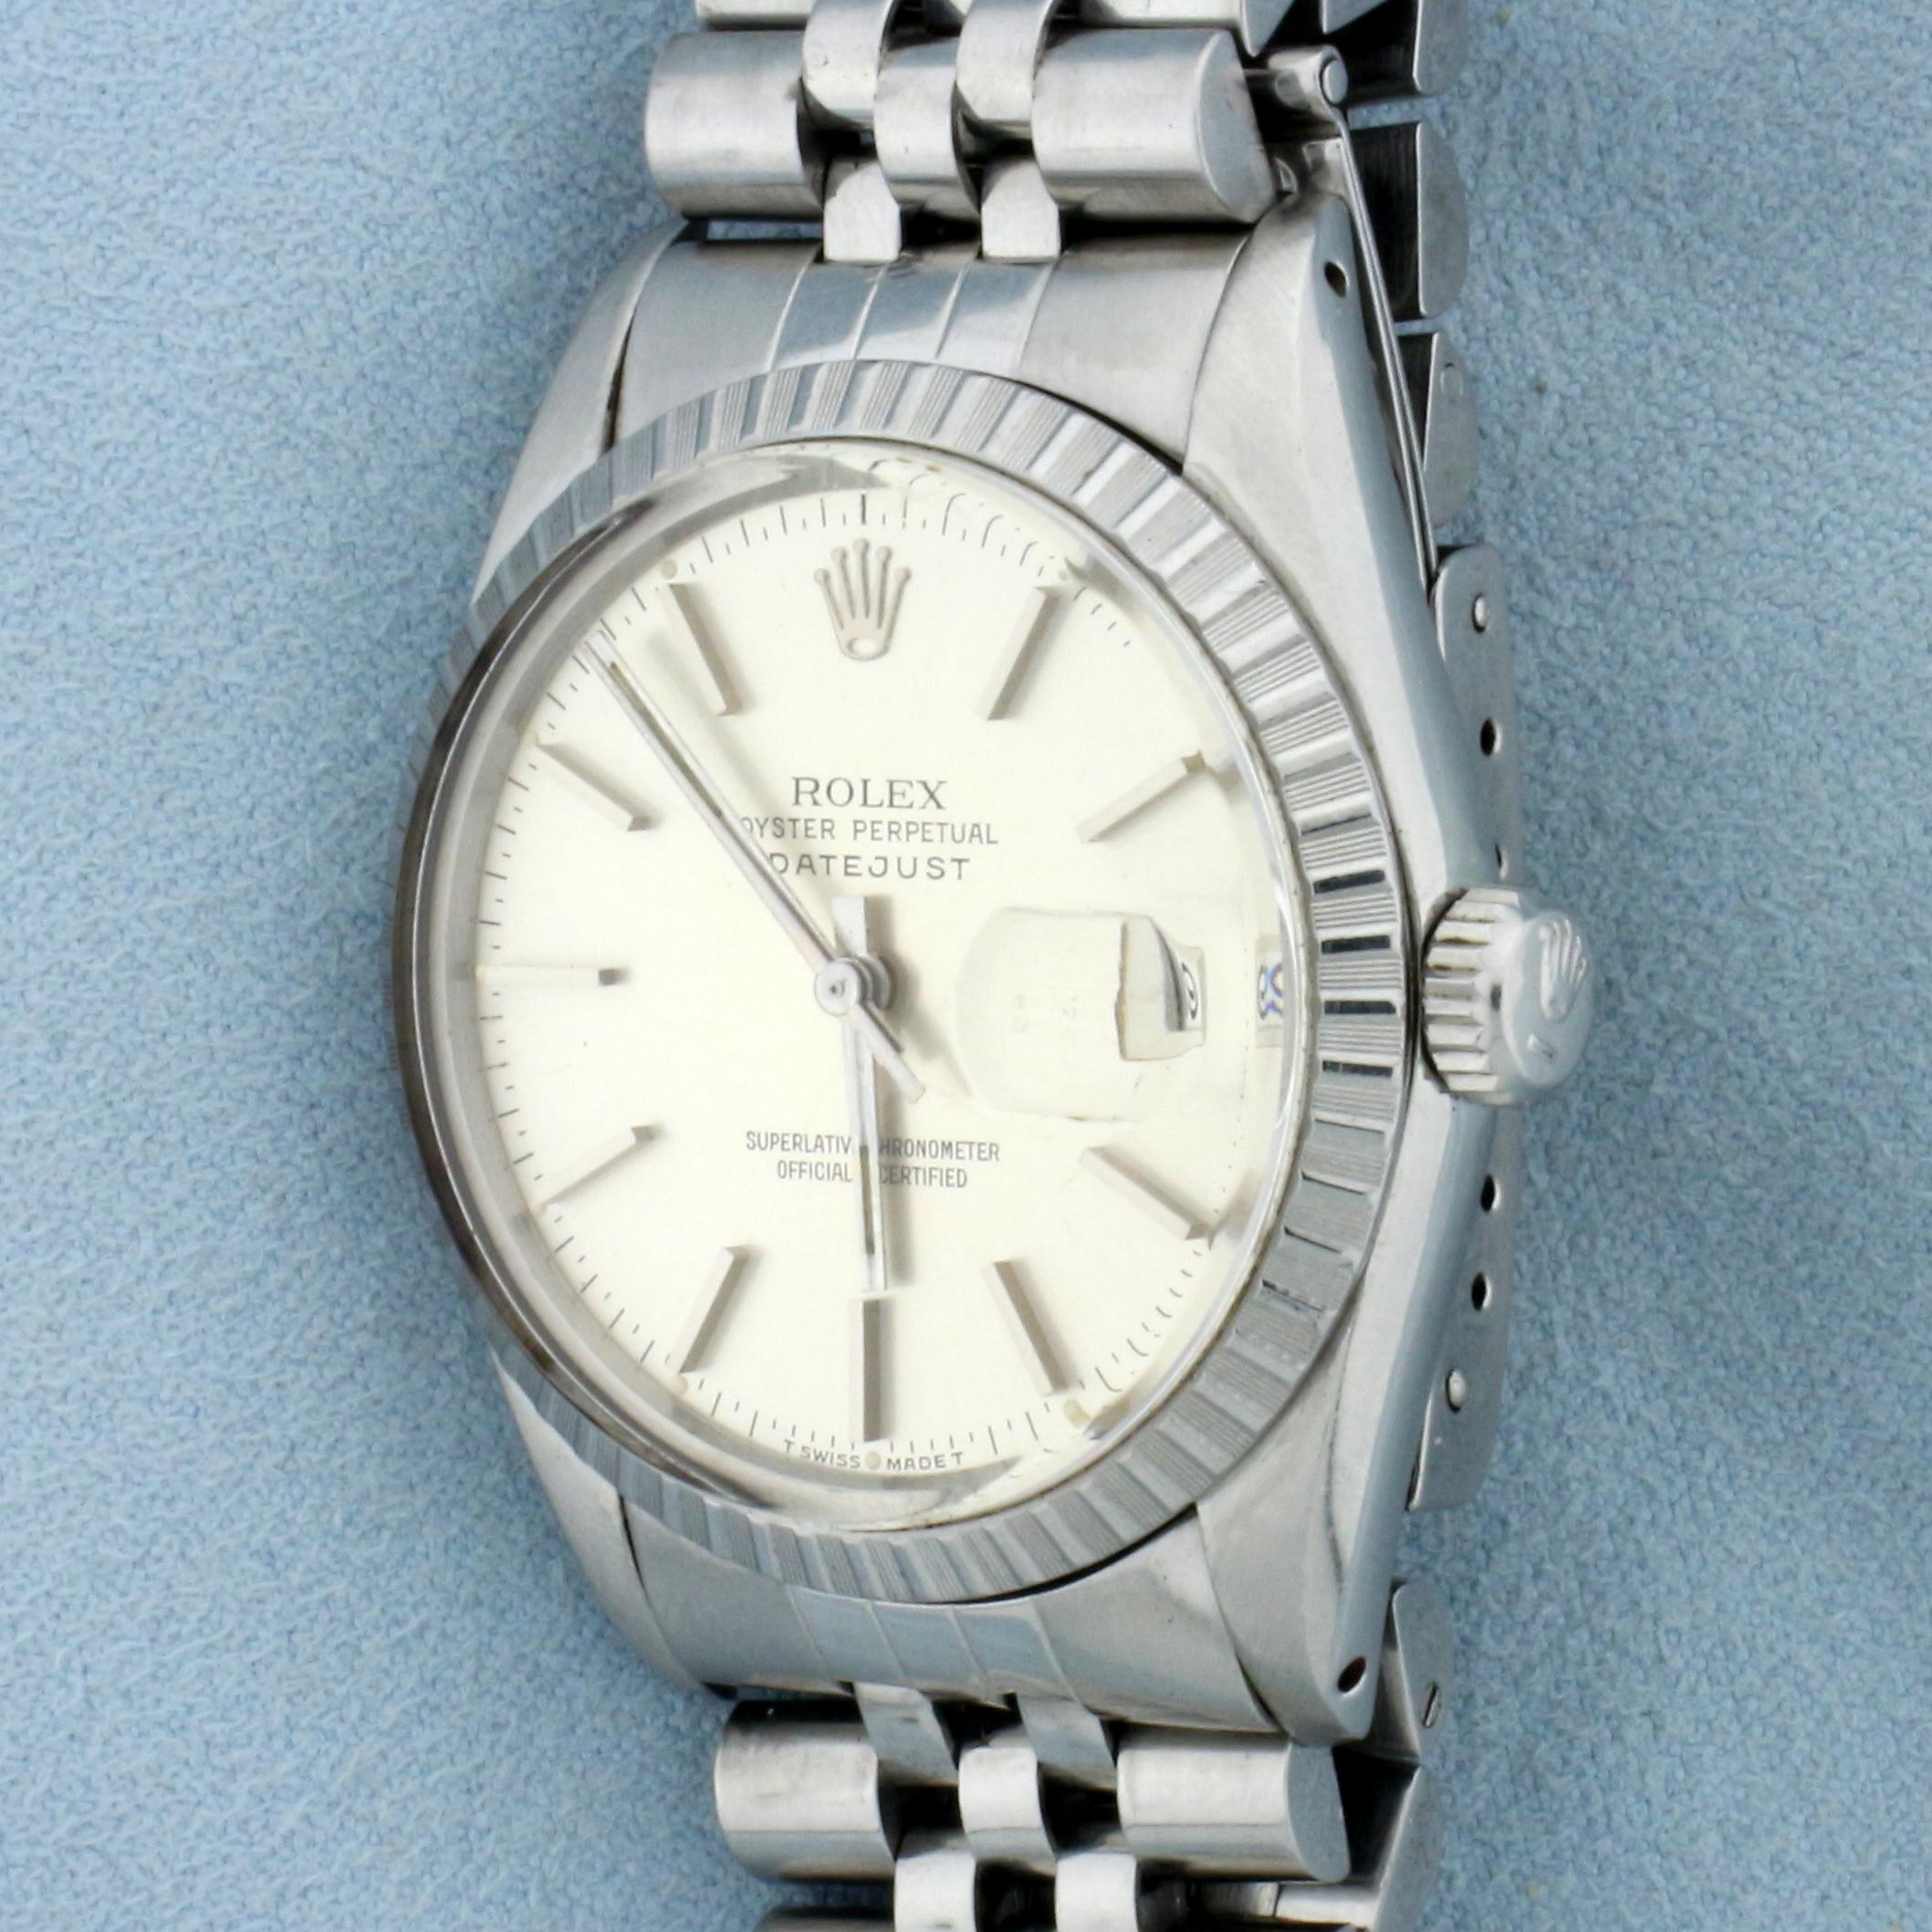 Mens Rolex 36mm Datejust Watch In Stainless Steel Model 16014